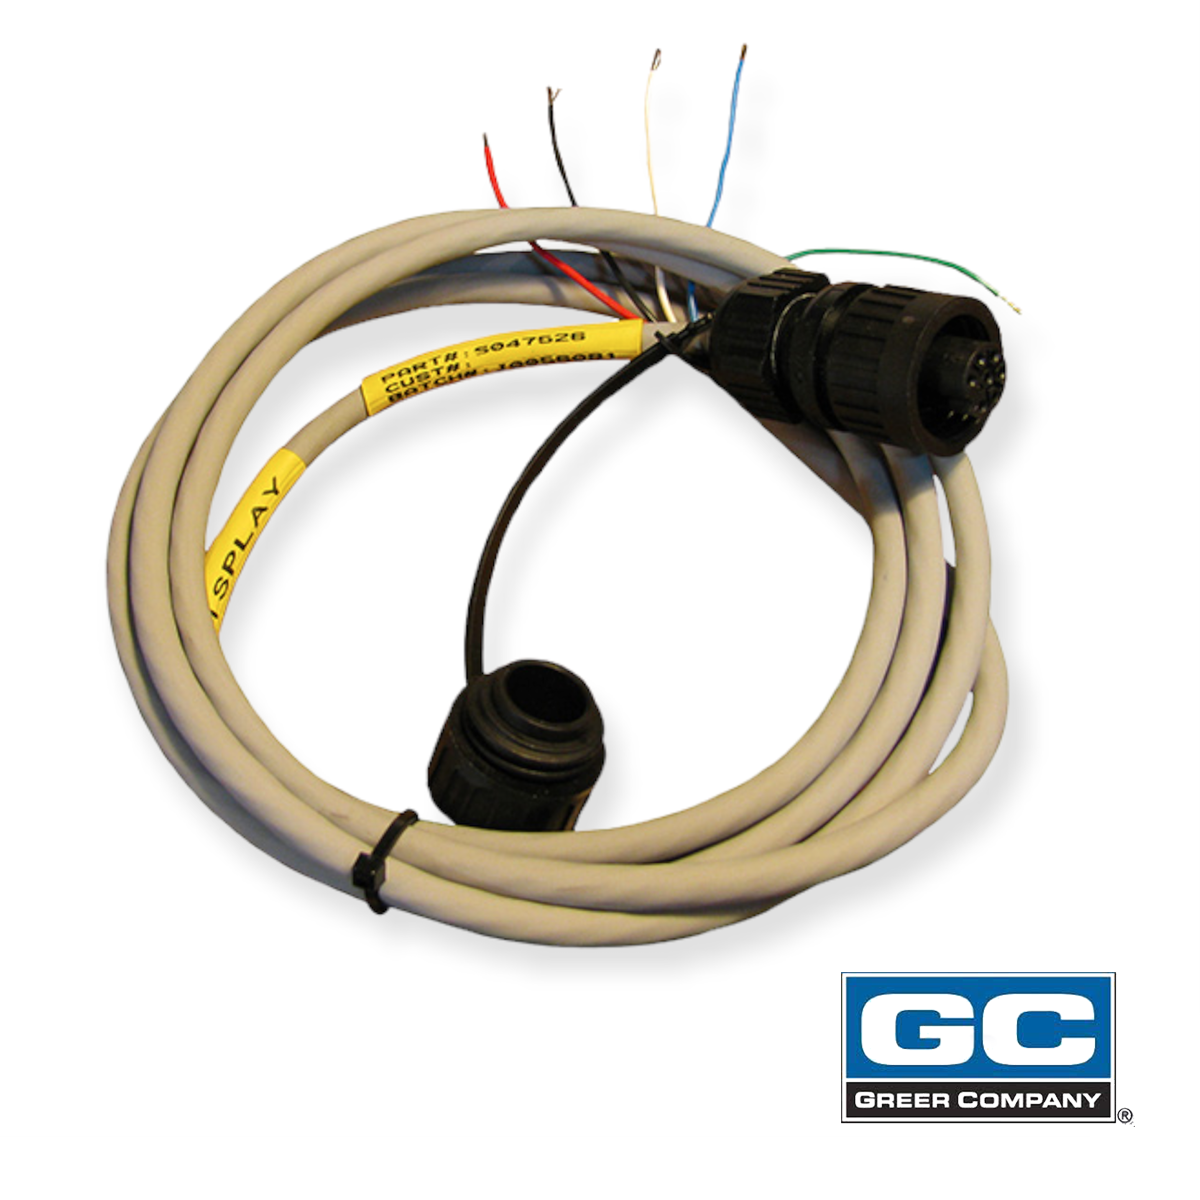 GREER S047526 : CABLE ASSY MG5 COMPUTER